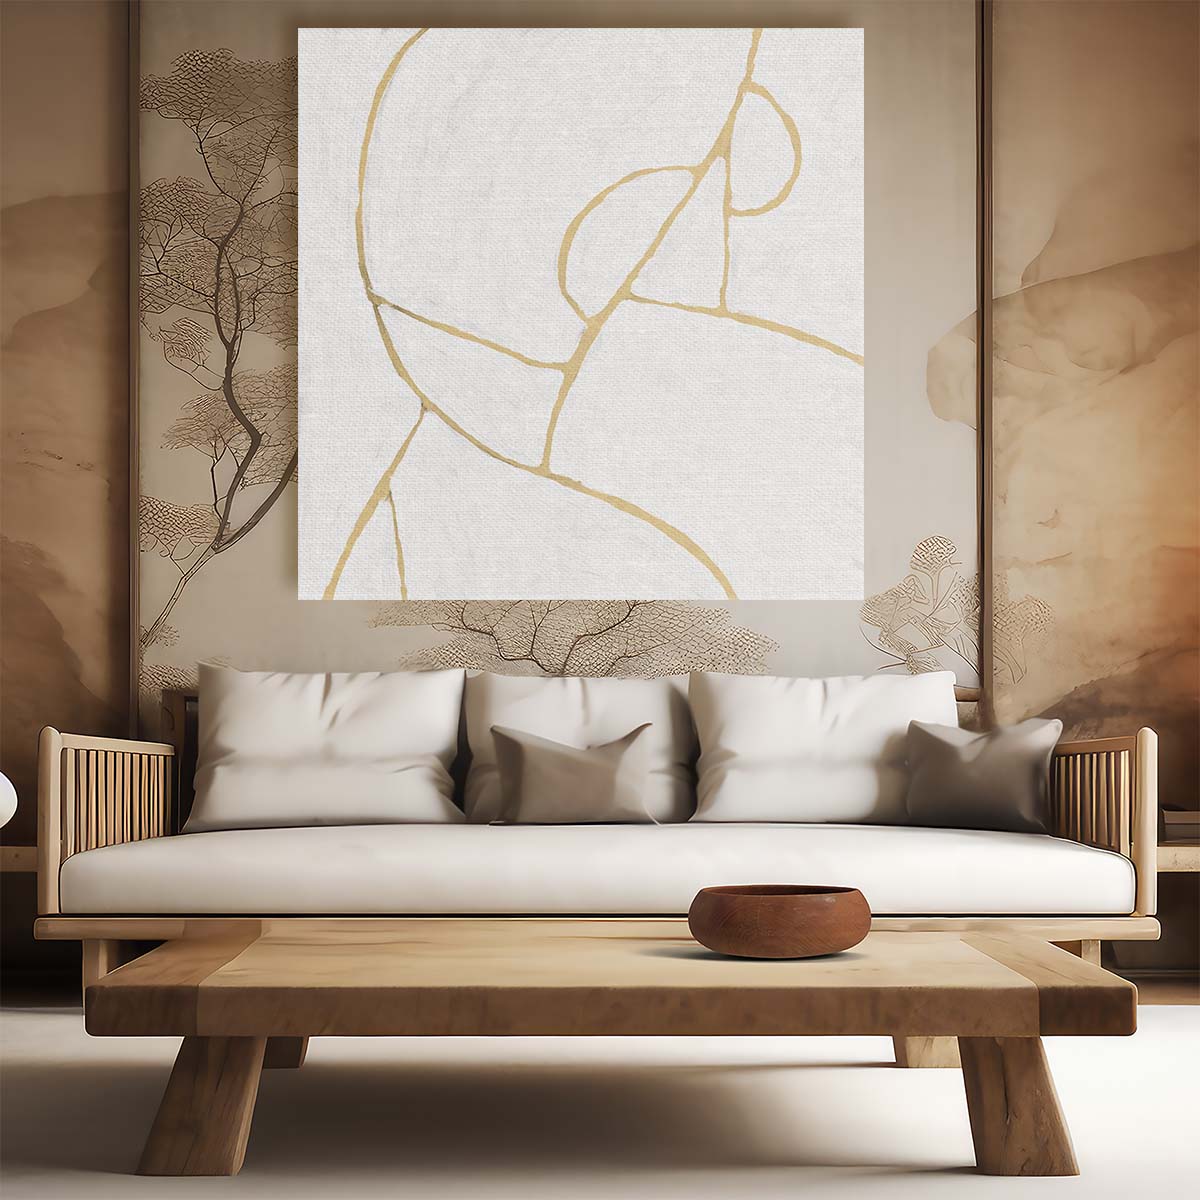 Geometric Lines Abstract Minimalist Painting by Dan Hobday Wall Art by Luxuriance Designs. Made in USA.